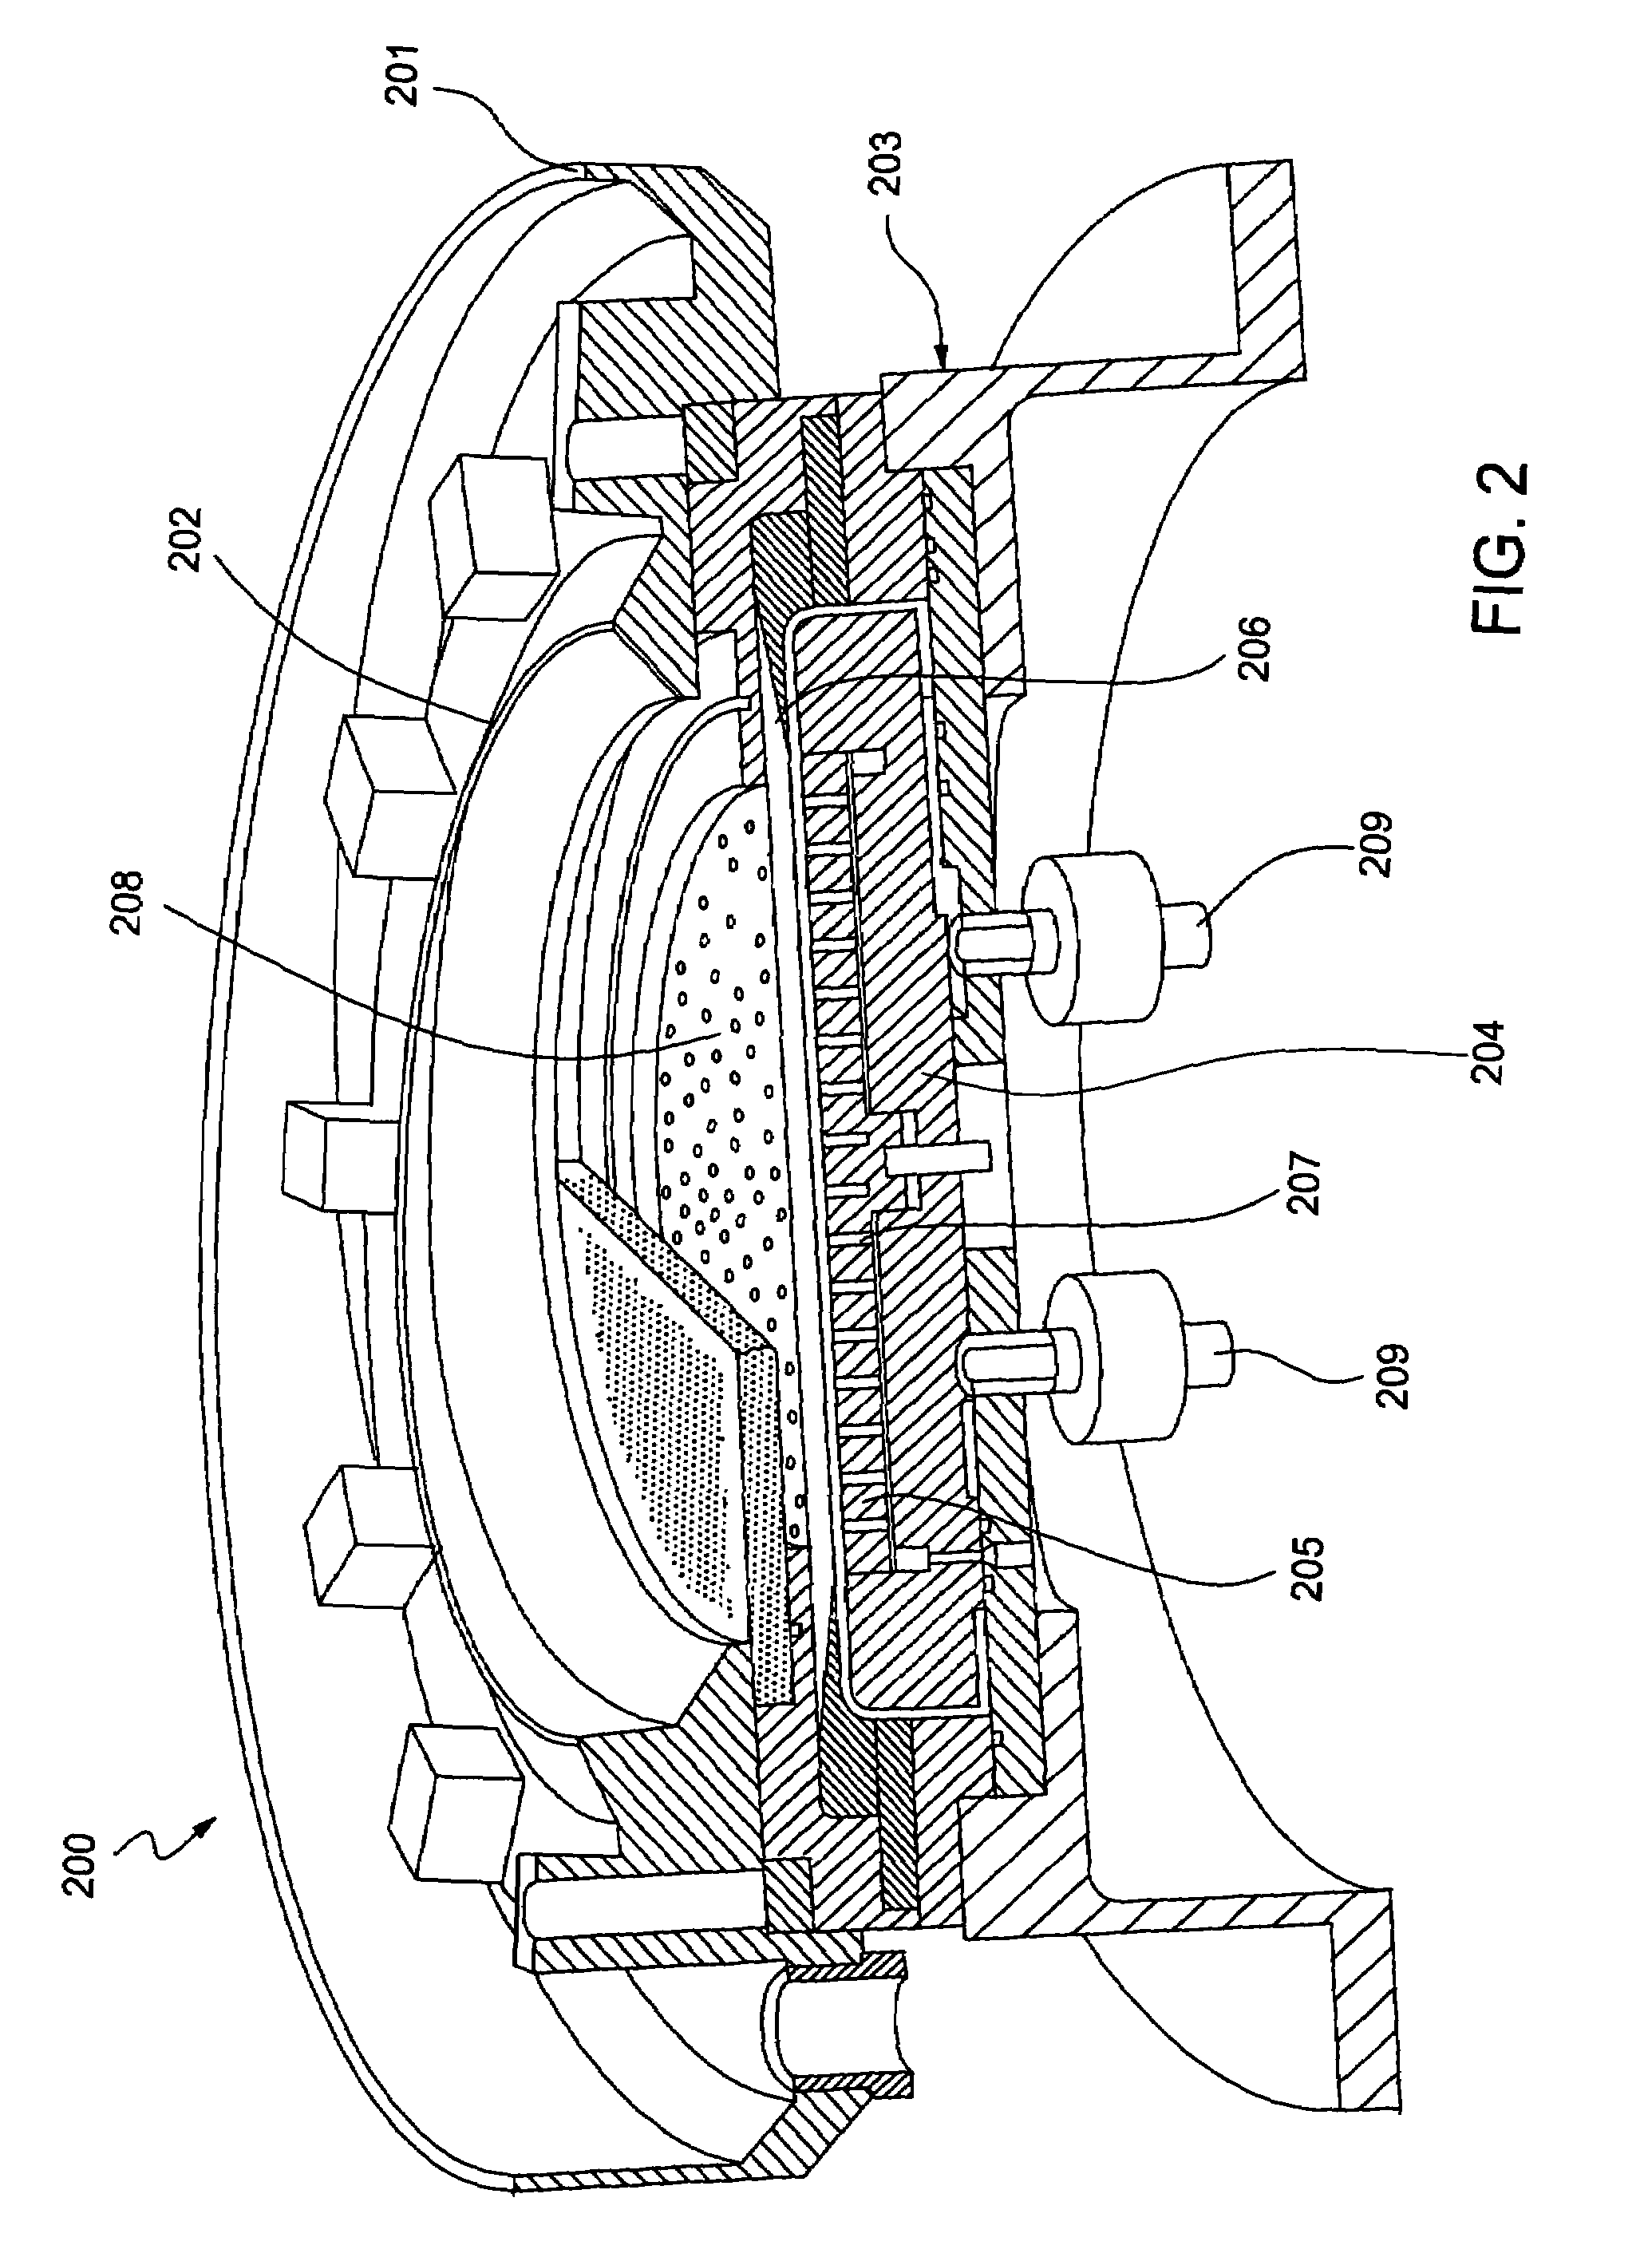 Electric field reducing thrust plate